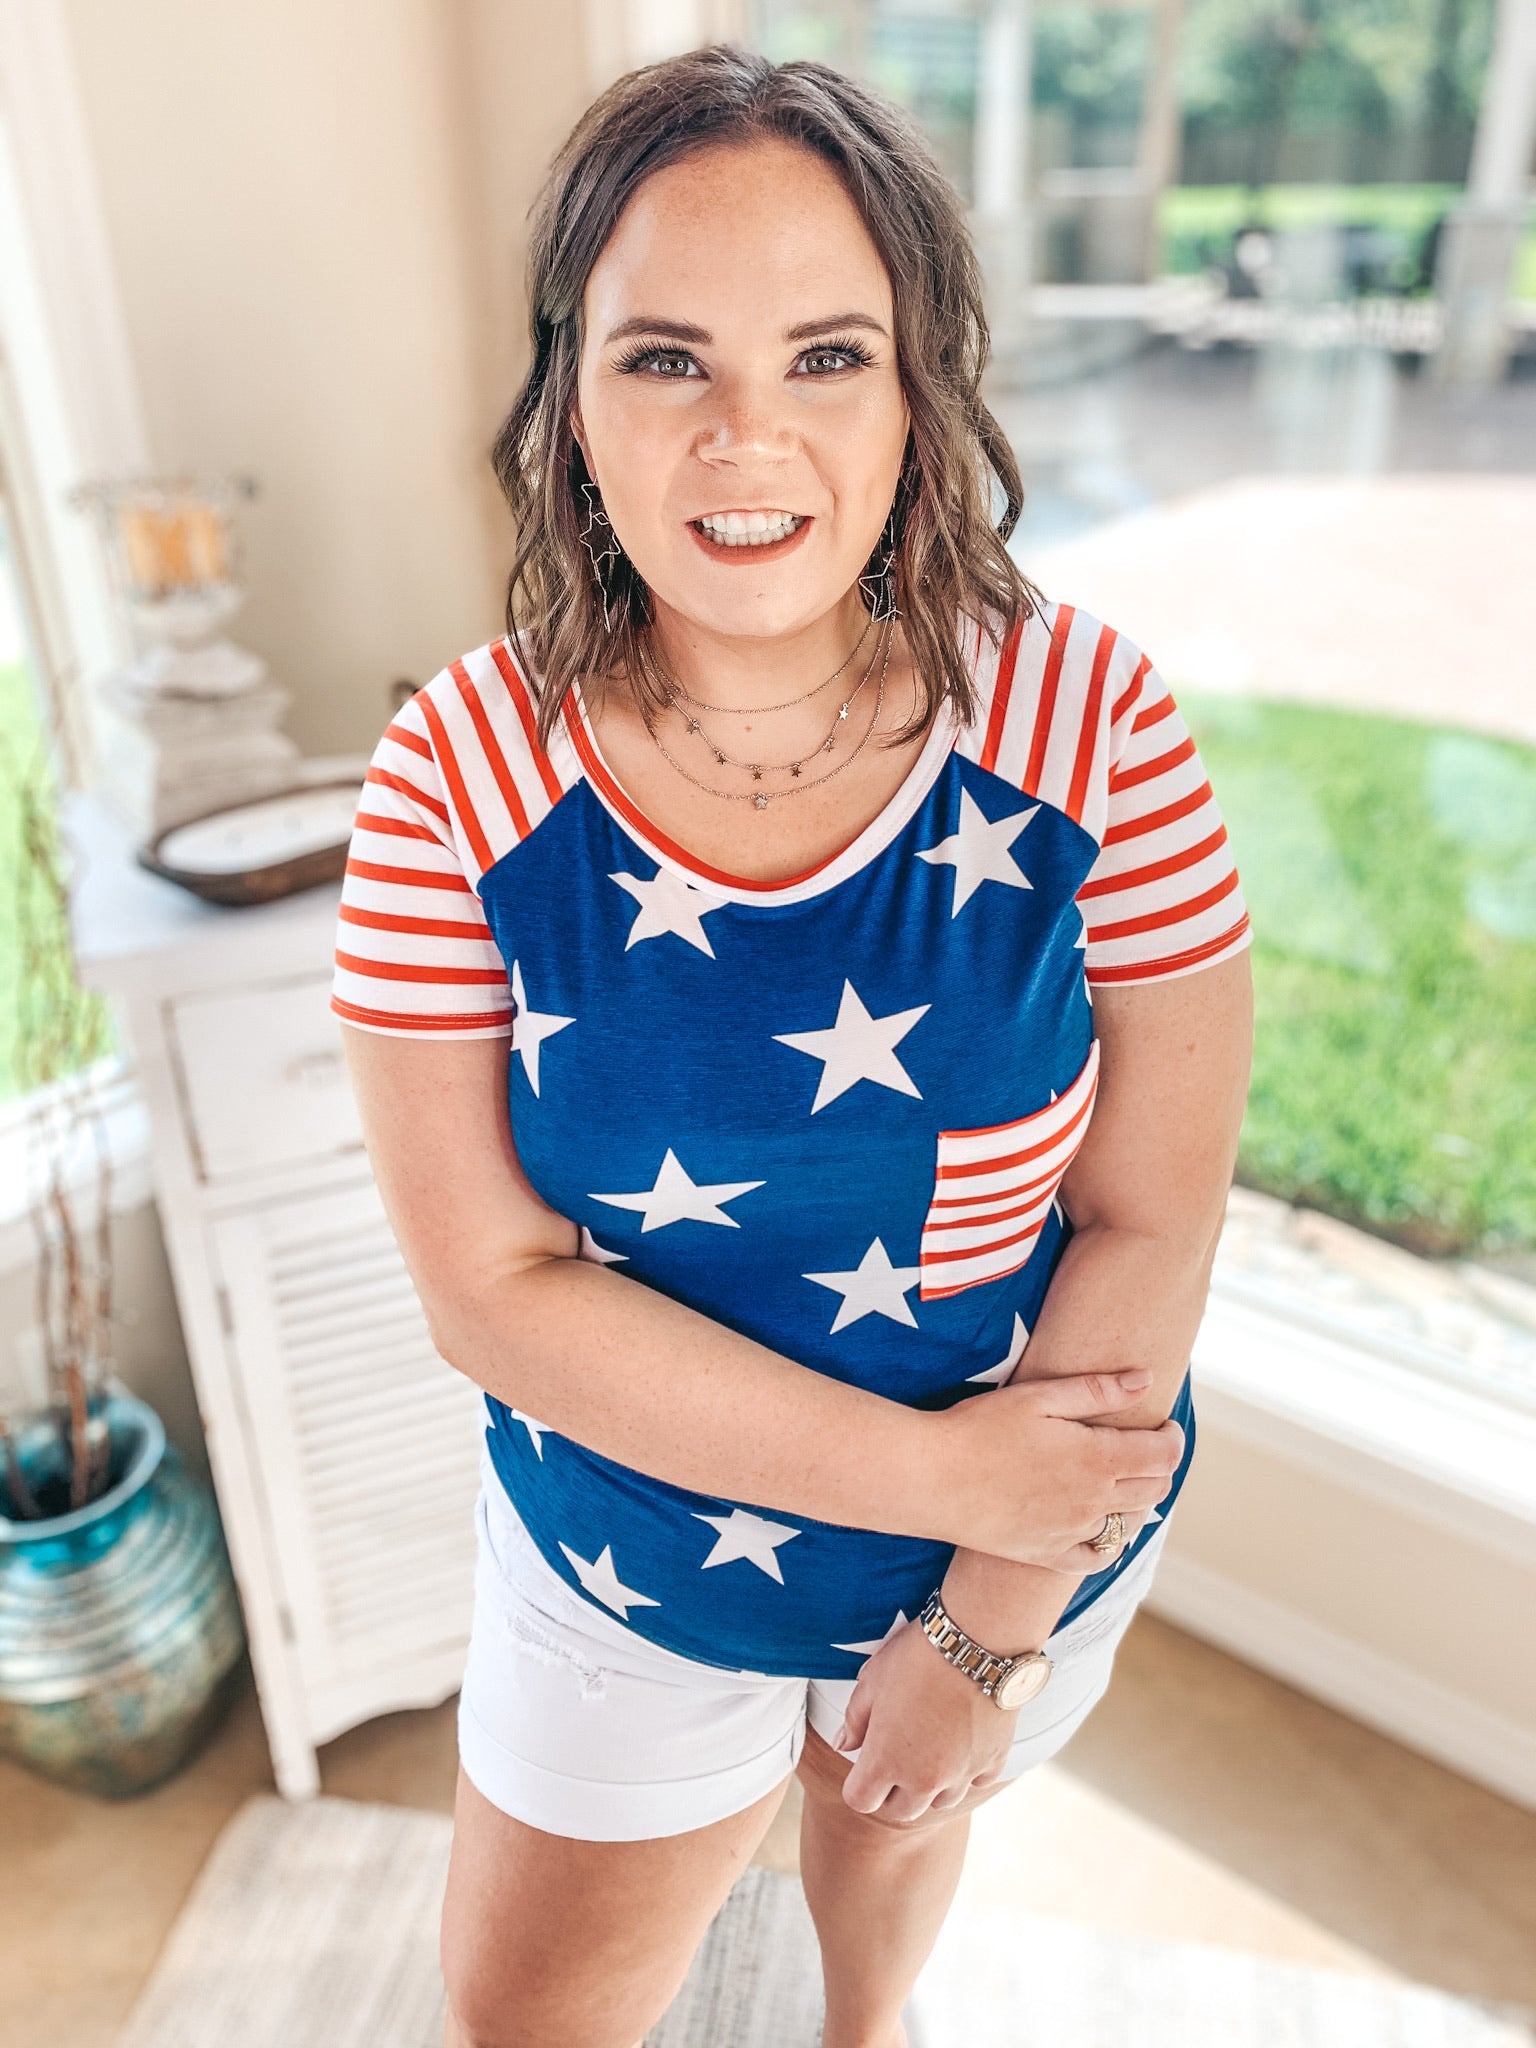 Feeling Festive Striped and Star Print Pocket Tee in Red, White, and Blue - Giddy Up Glamour Boutique